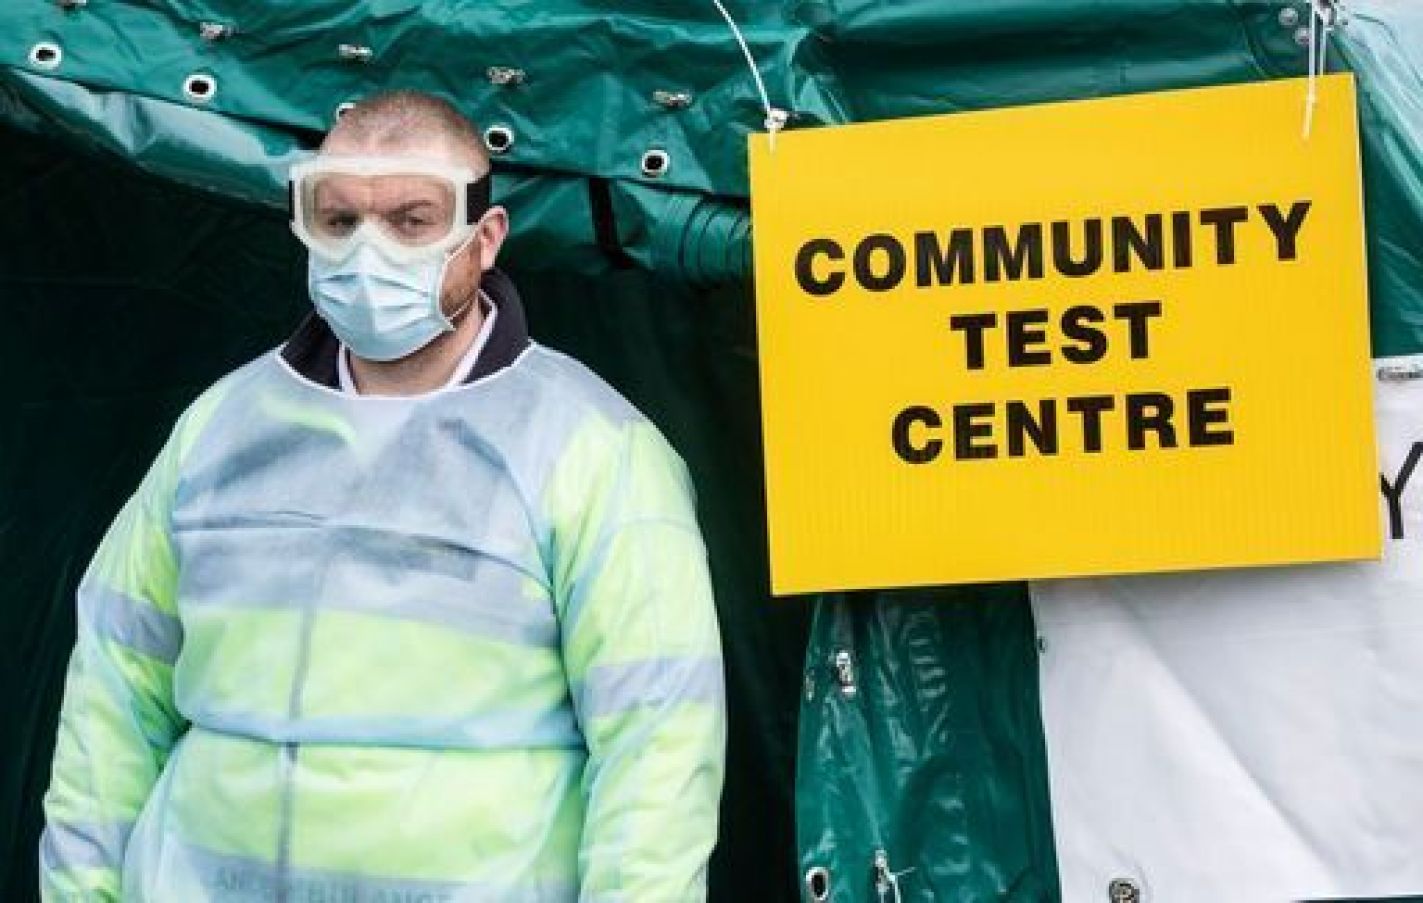 Members Of The National Ambulance Service Working At A Walk-In Test Centre On The Grounds Of Grangegorman Primary Care Centre In Dublin As A Number Of Centres Have Opened In Areas Where There Is A High Rate Of Covid-19 Transmission. The Public Does Not Need To Get A Gp Referral And All Tests Will Be Free Under The New Initiative. Picture Date: Thursday March 25, 2021.